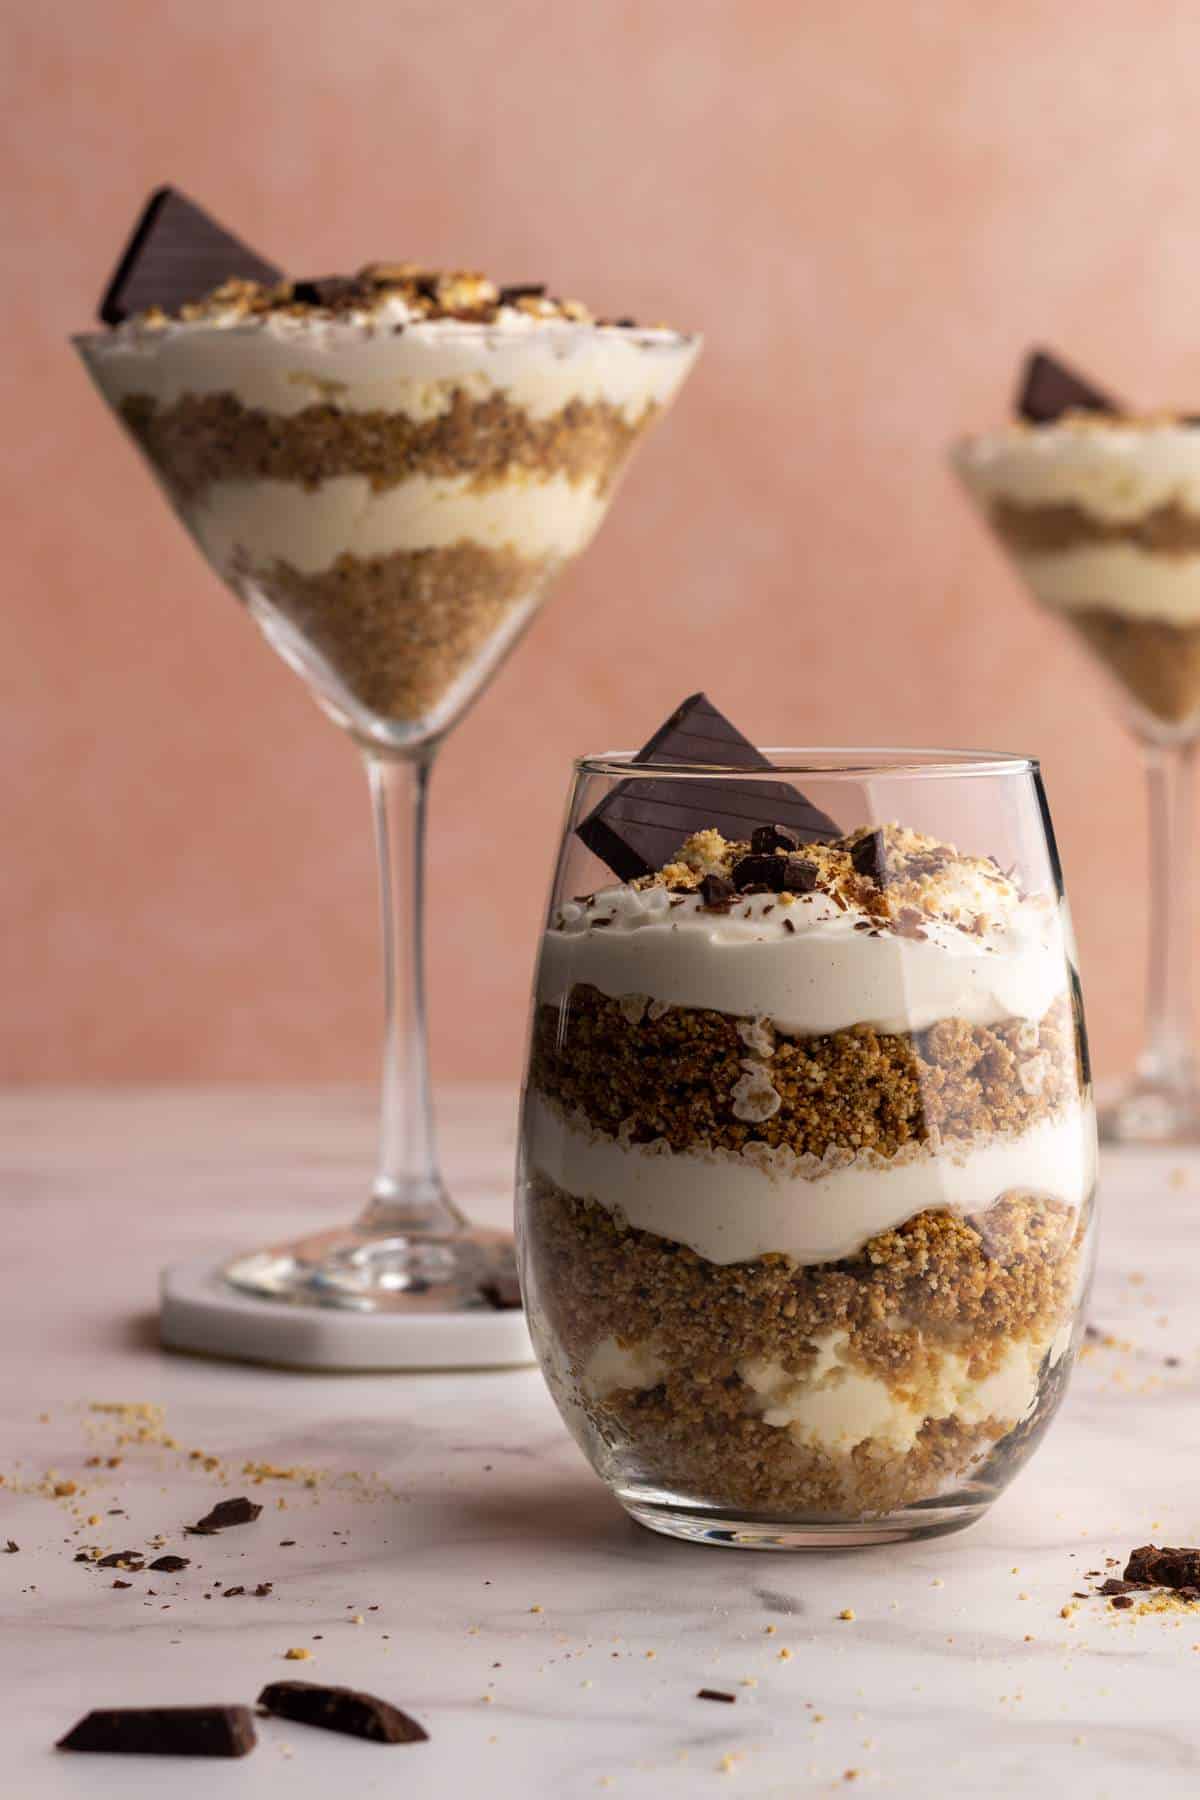 Biscuit parfait layered in a small glass head-on shot.